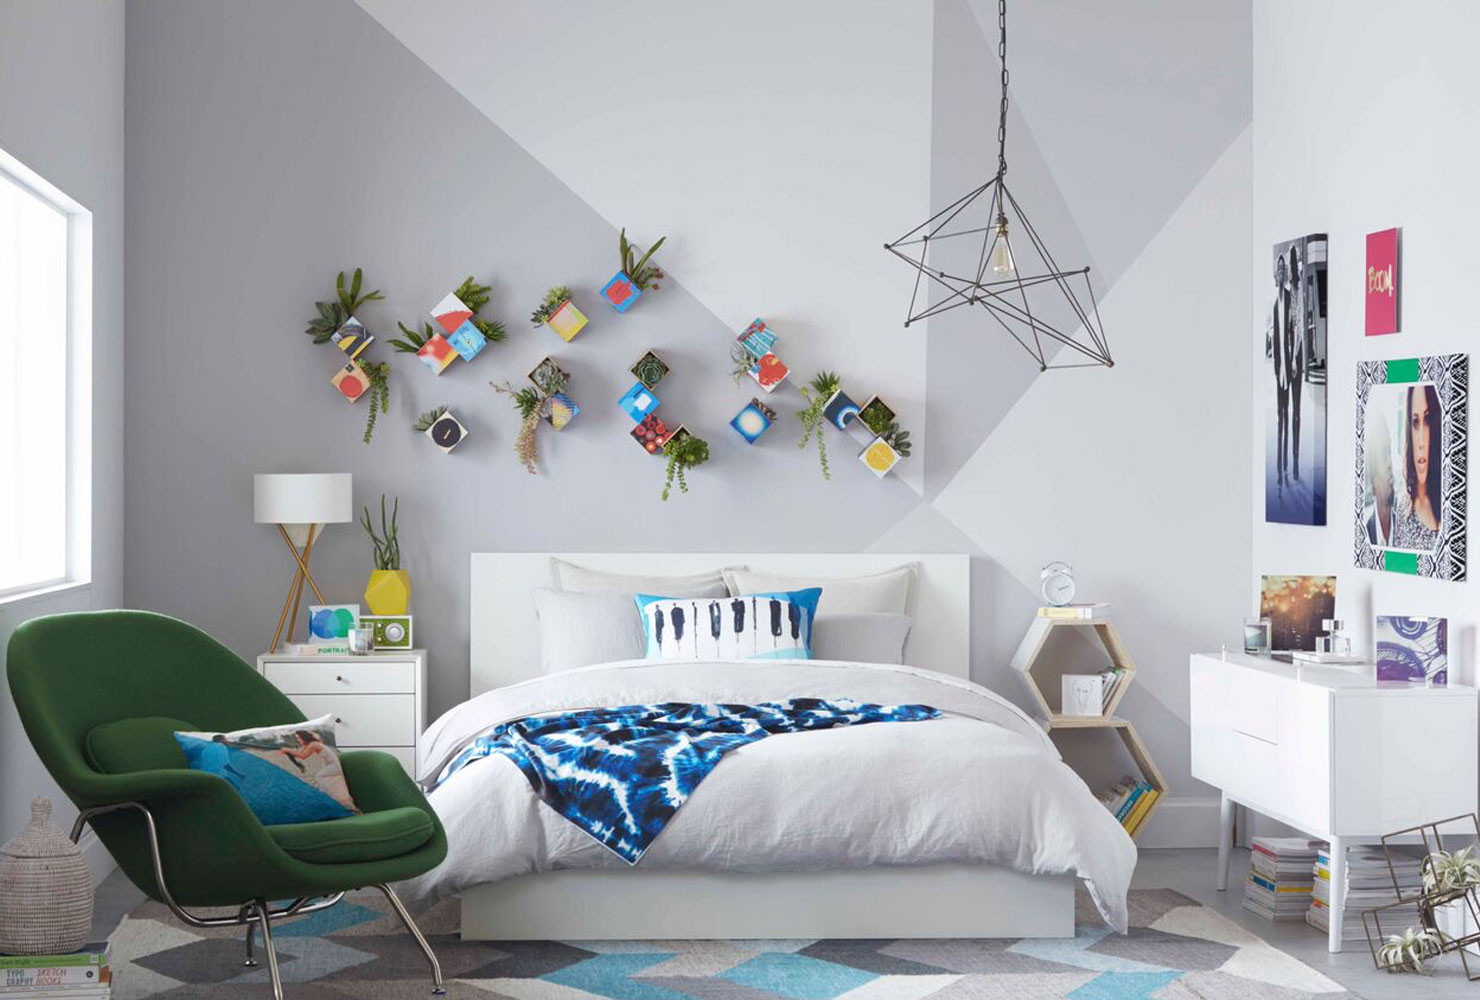 DIY Decorations For Bedroom
 24 DIY Bedroom Decor Ideas To Inspire You With Printables